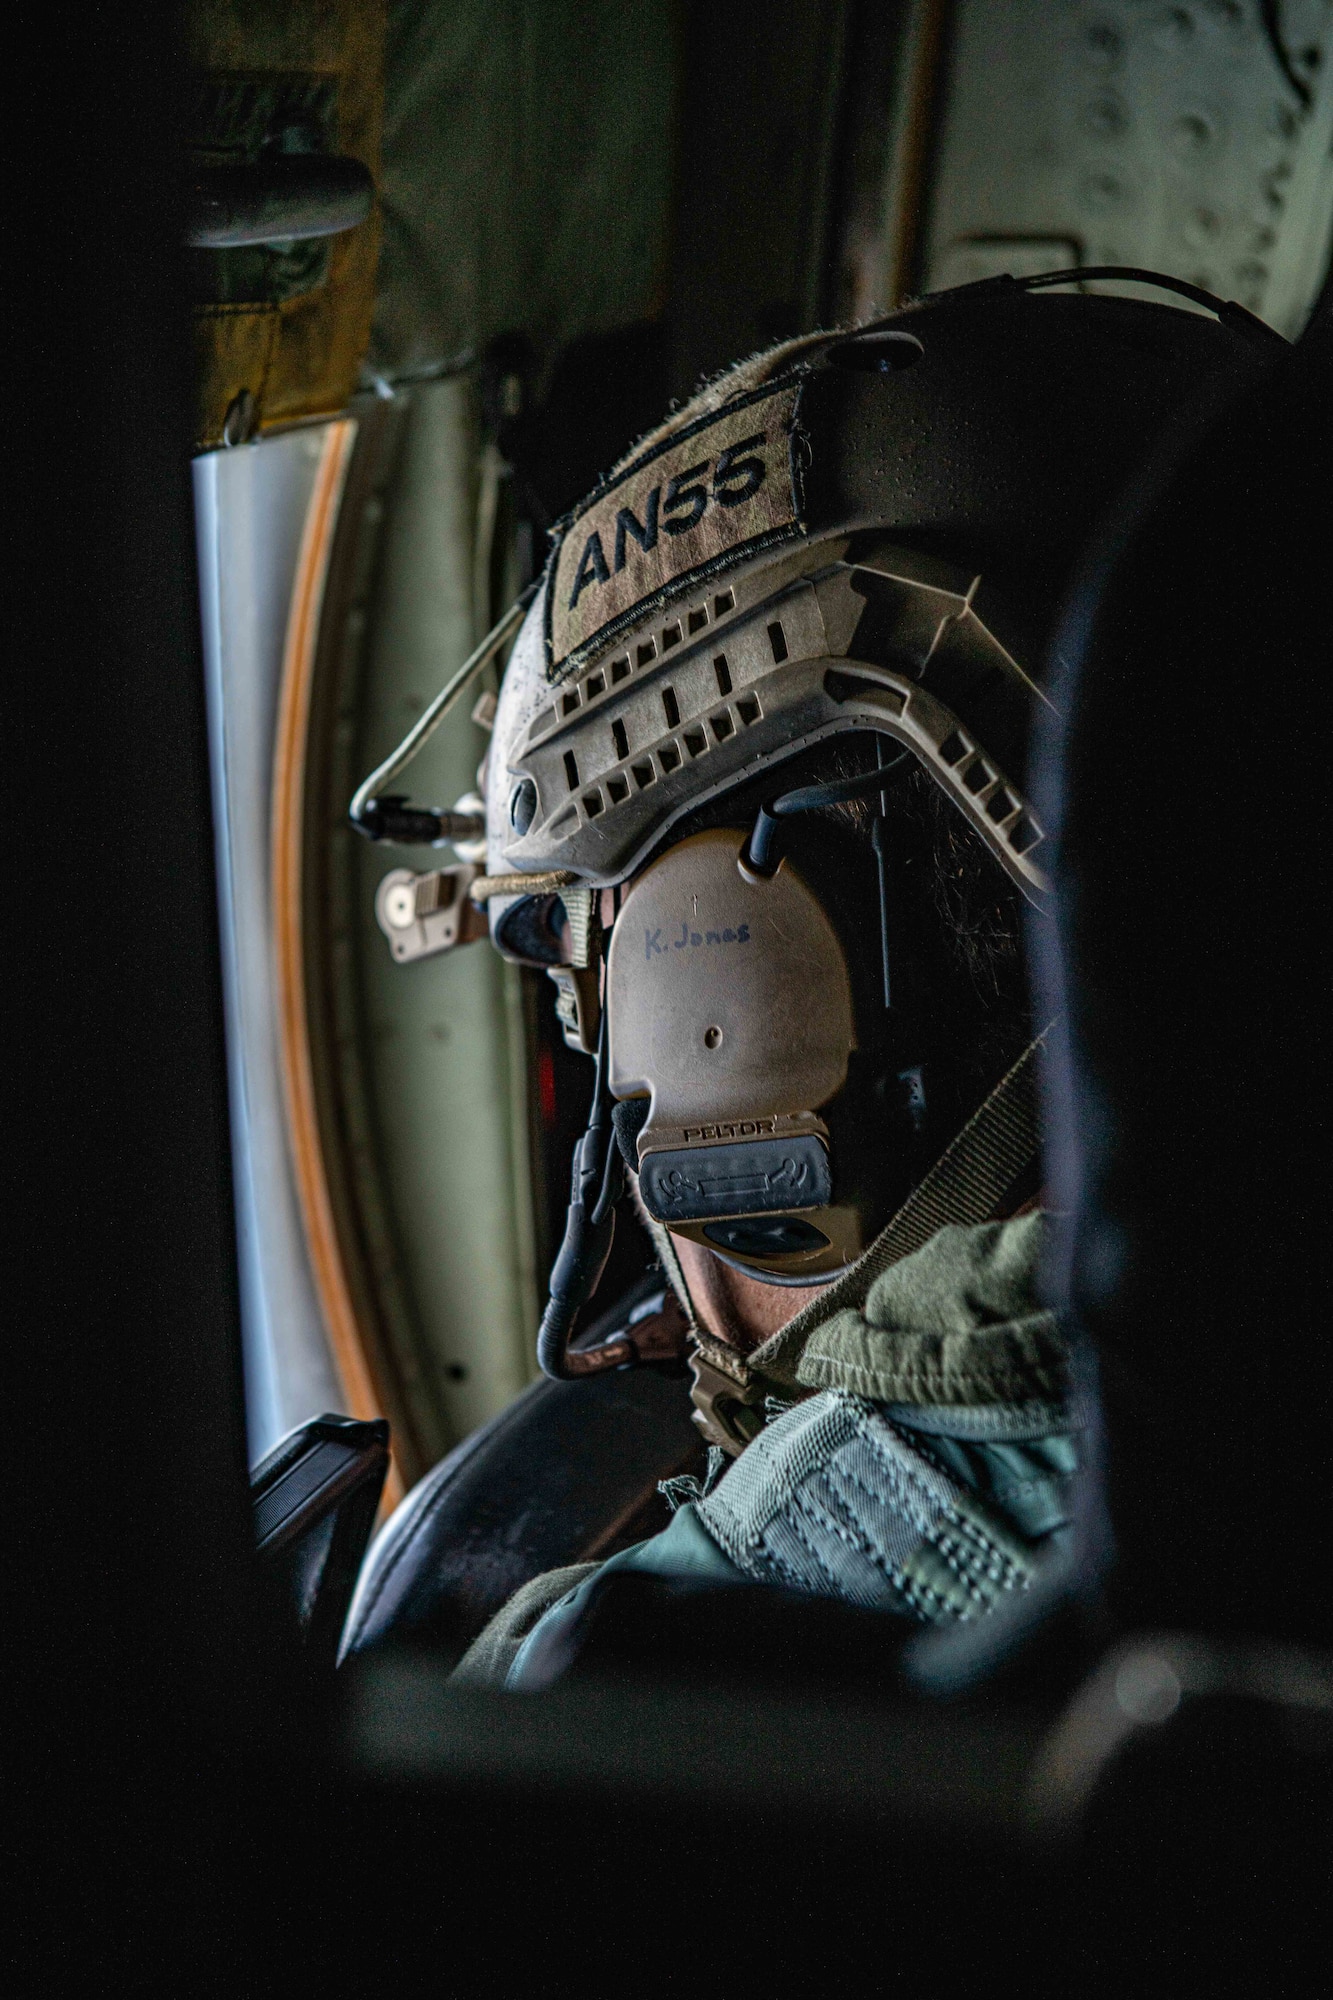 An Airman stares out the window towards the ocean